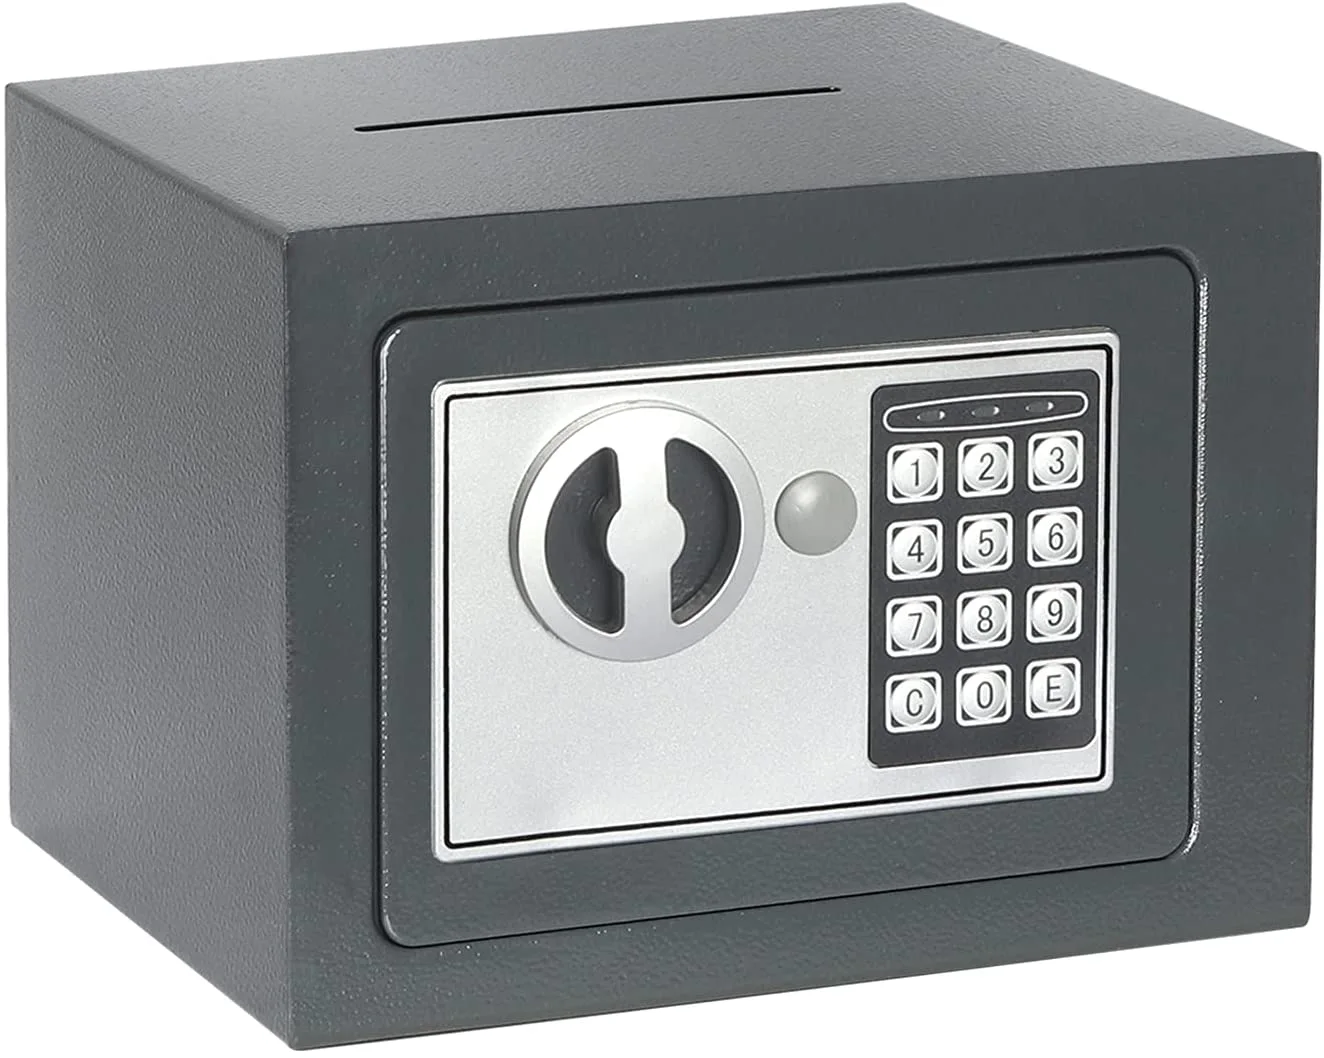 Mini Size Colorful Electronic Security Steel Safe With Coin Bill Slot For Home Office Safety C17AC-D